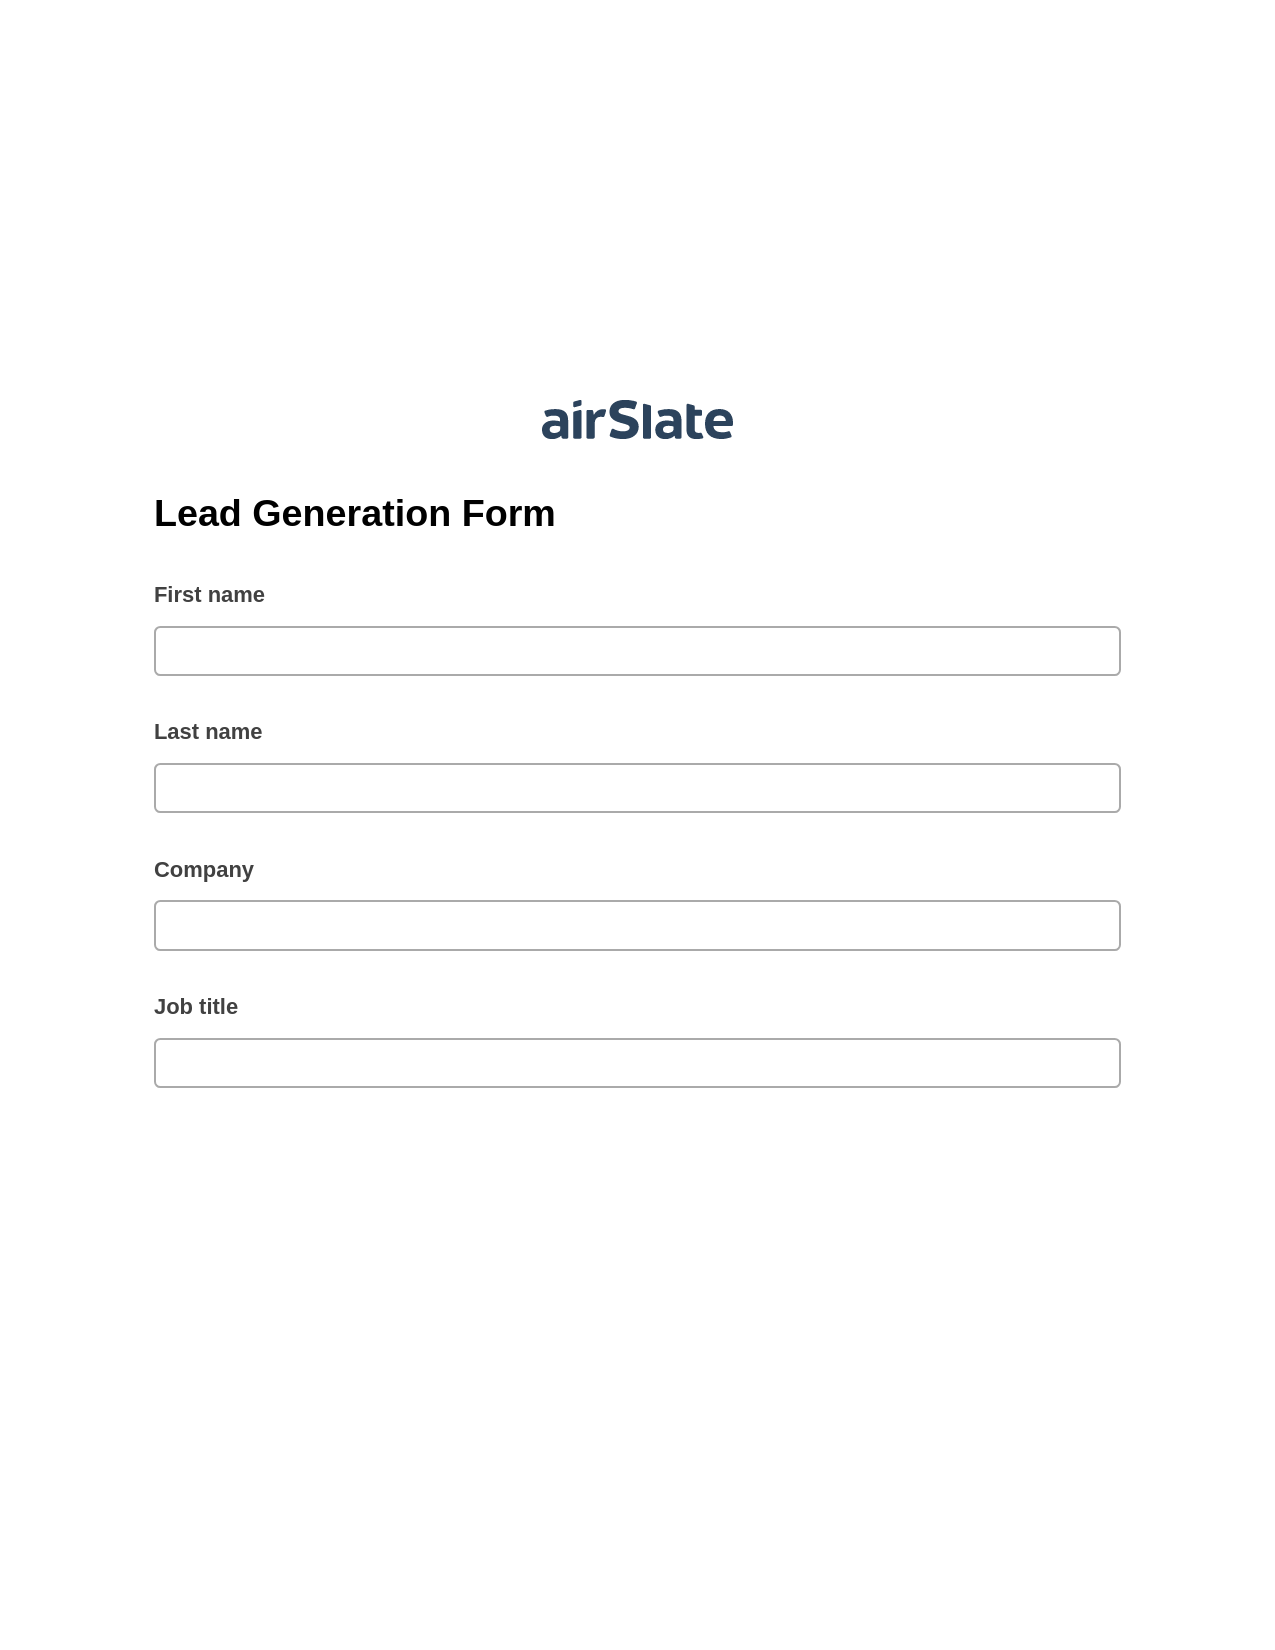 Multirole Lead Generation Form Pre-fill from Google Sheets Bot, Send a Slate with Roles Bot, Archive to SharePoint Folder Bot